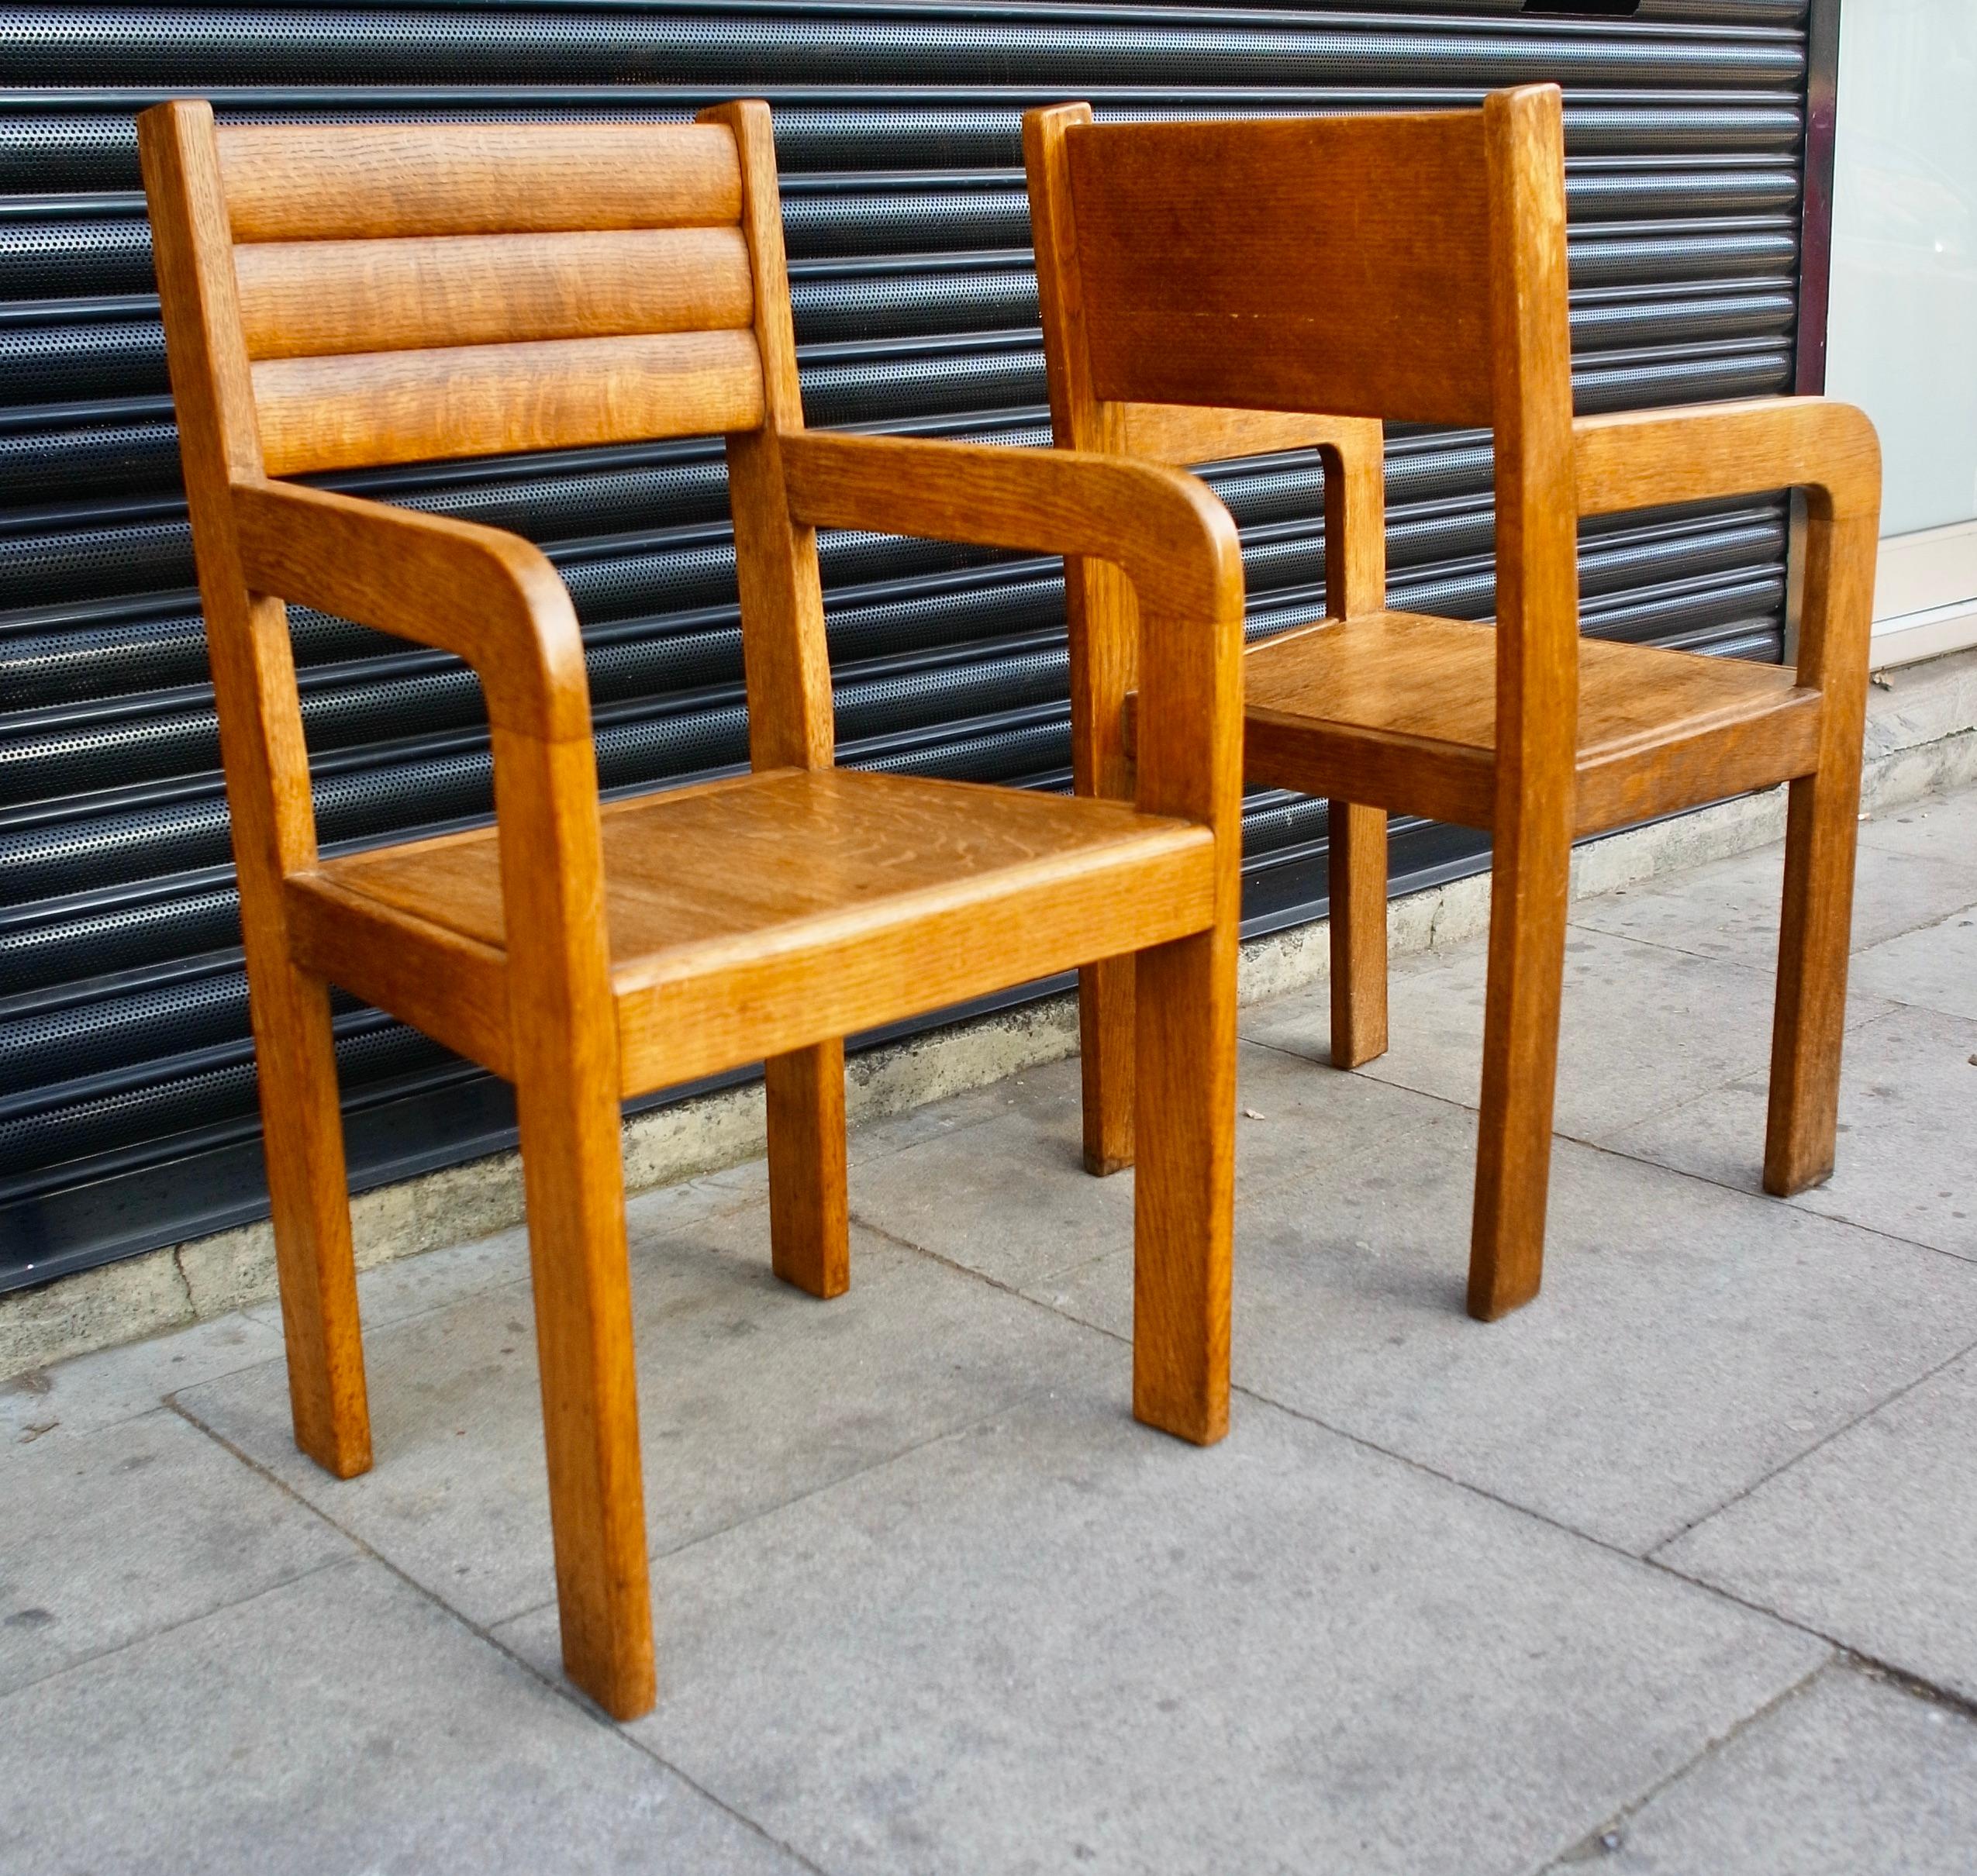 Pair of 1940s Handmade English Oak Vintage Carver/Side Chairs For Sale 1